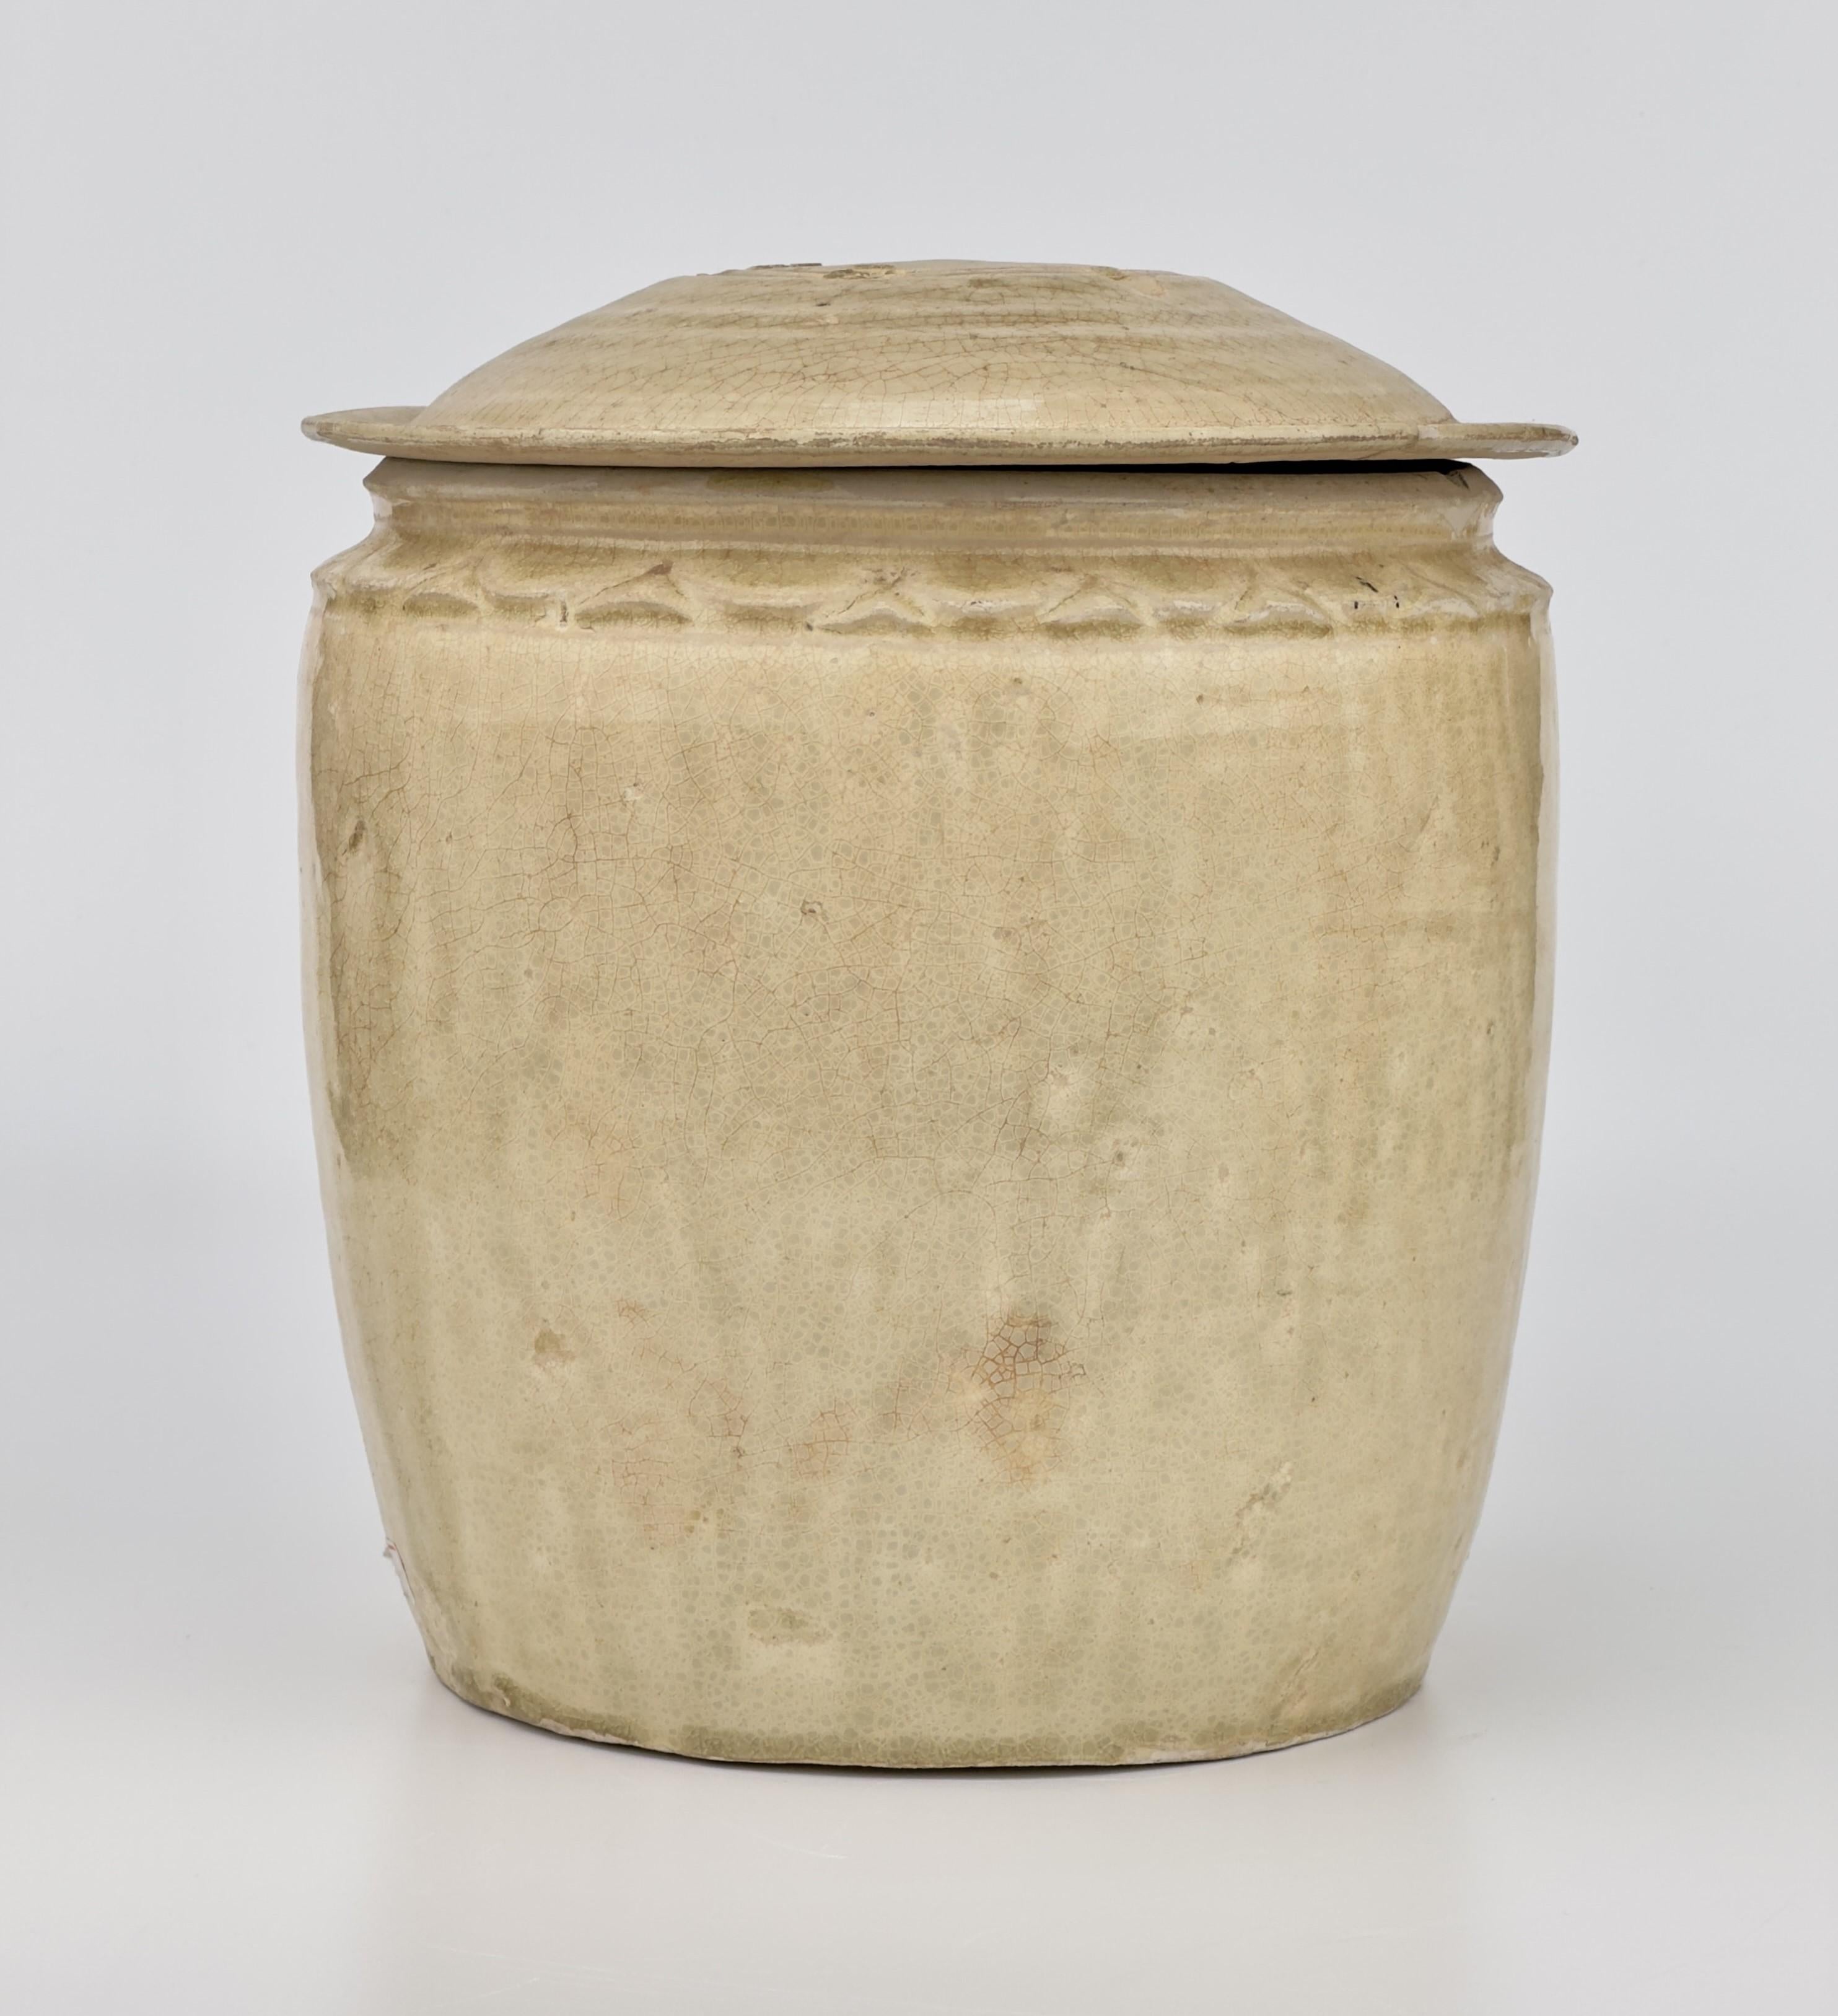 Famous annamese cylindrical jar with lid. Decor modeled in lotus petals, covered with a cream glaze.


Dates : Presumably Ly Dynasty (11-13th century)
Region : Vietnam
Type : Jar
Found/Acquired : Southeast Asia , South China Sea, Shipwreck
Reference